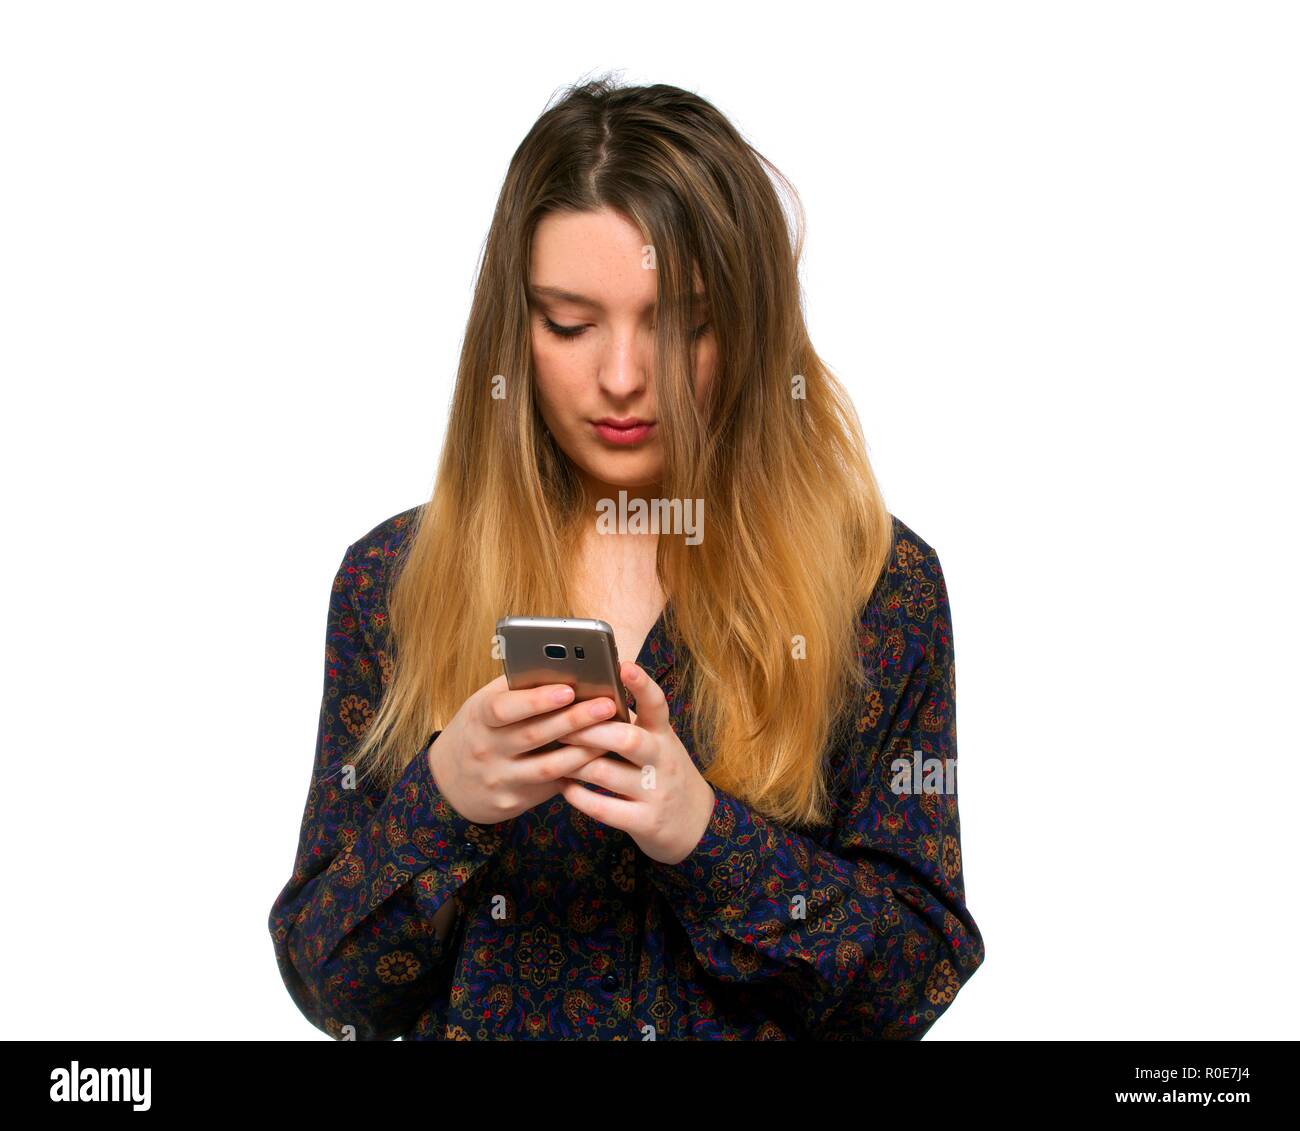 Young woman using smartphone against white background. Stock Photo